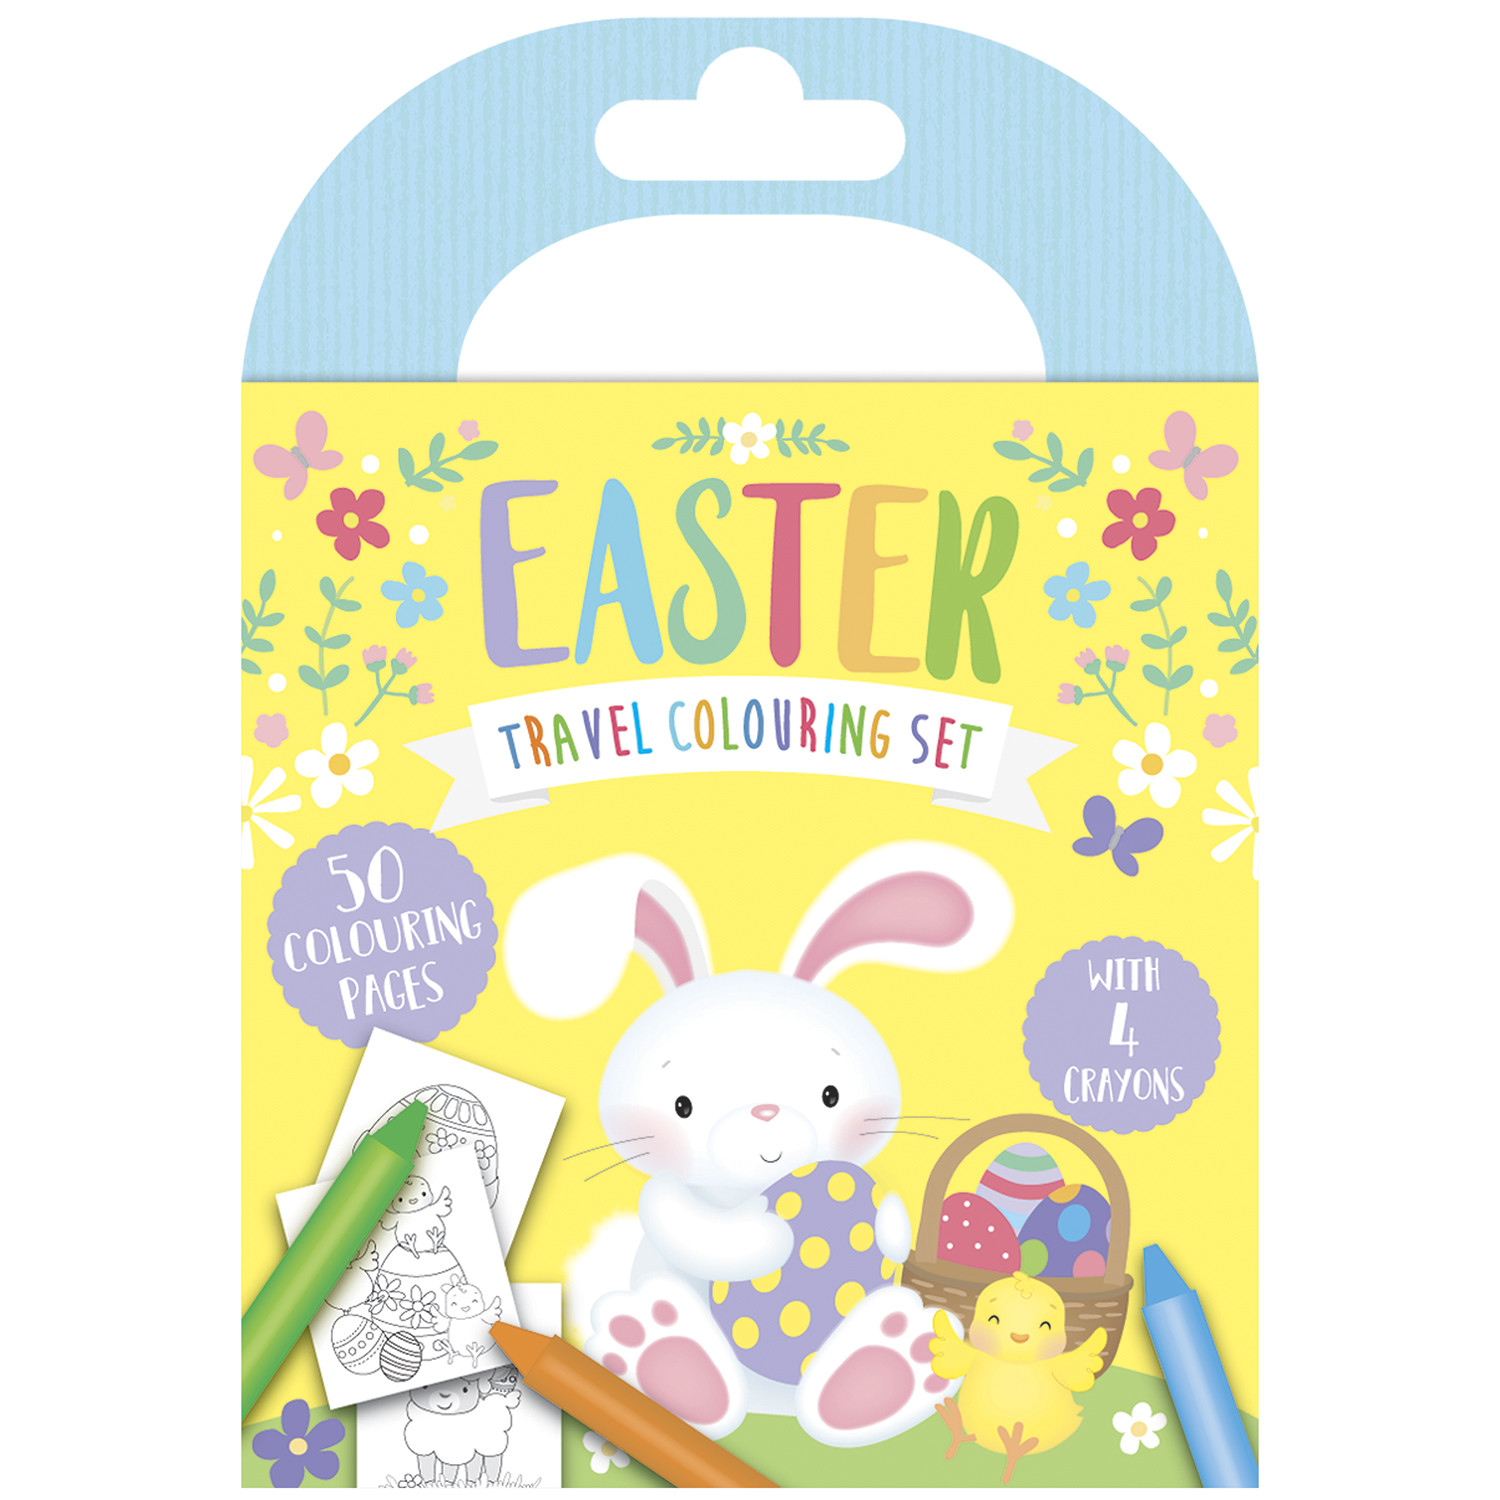 Easter Travelling Colouring Set Image